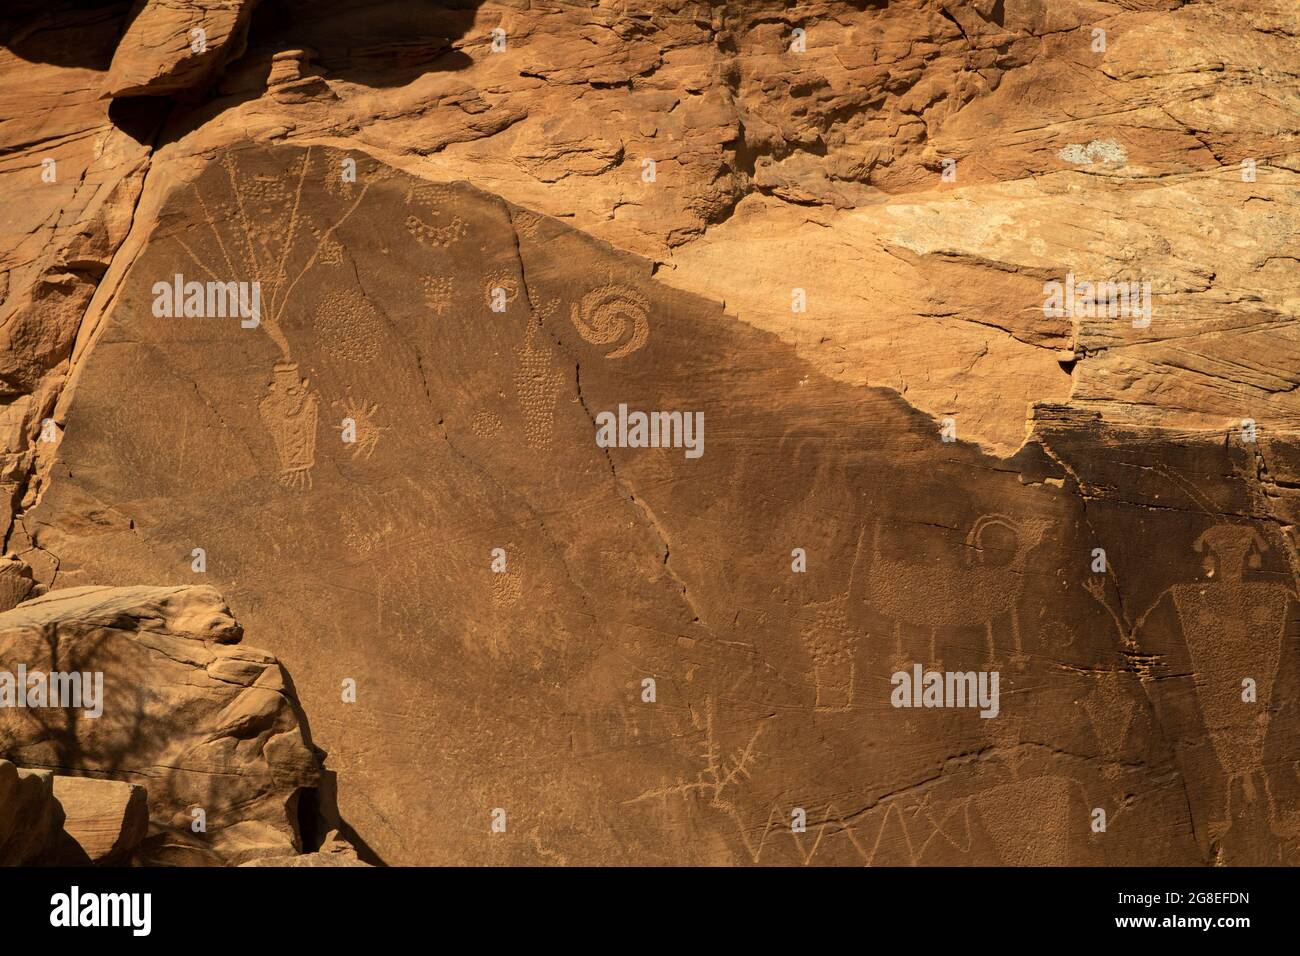 Fremont culture petroglyphs at Dinosaur National Monument, on the Utah side. This slab includes a spiral, bighorn sheep, turkeys and other symbols. Stock Photo